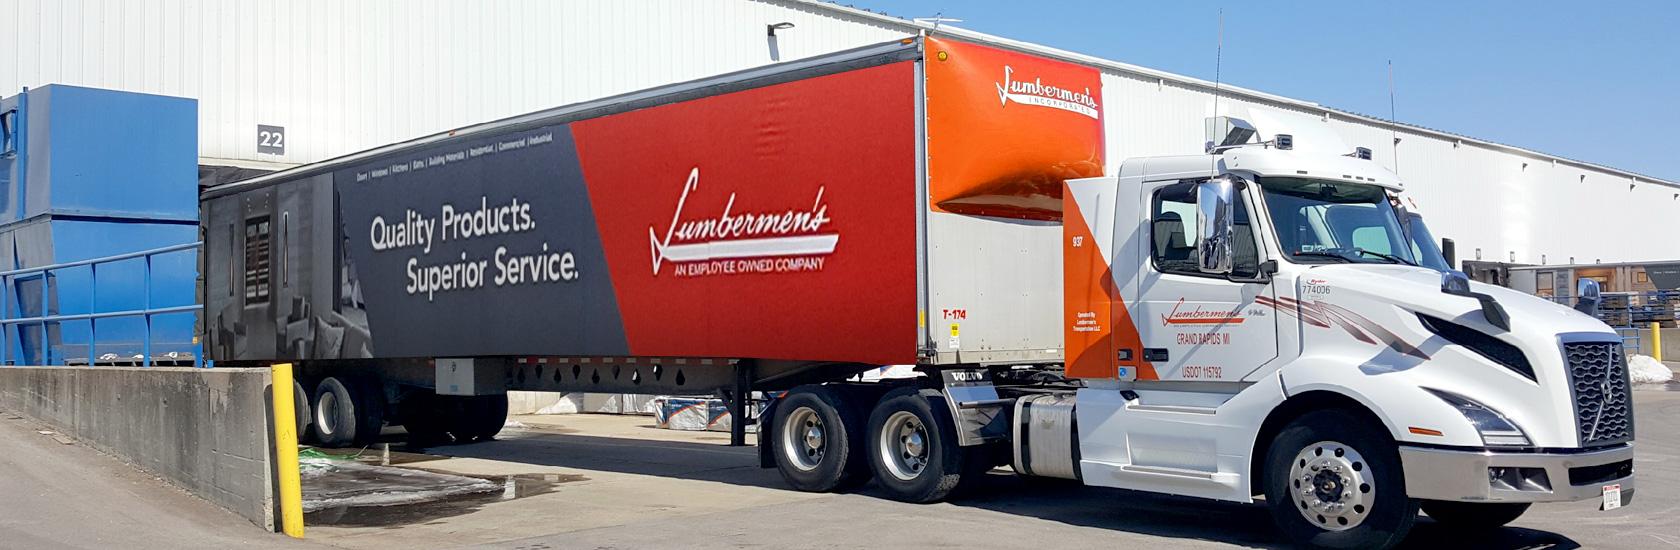 Product Truck Delivery Building Materials | Lumbermen's Inc. | Distributor image